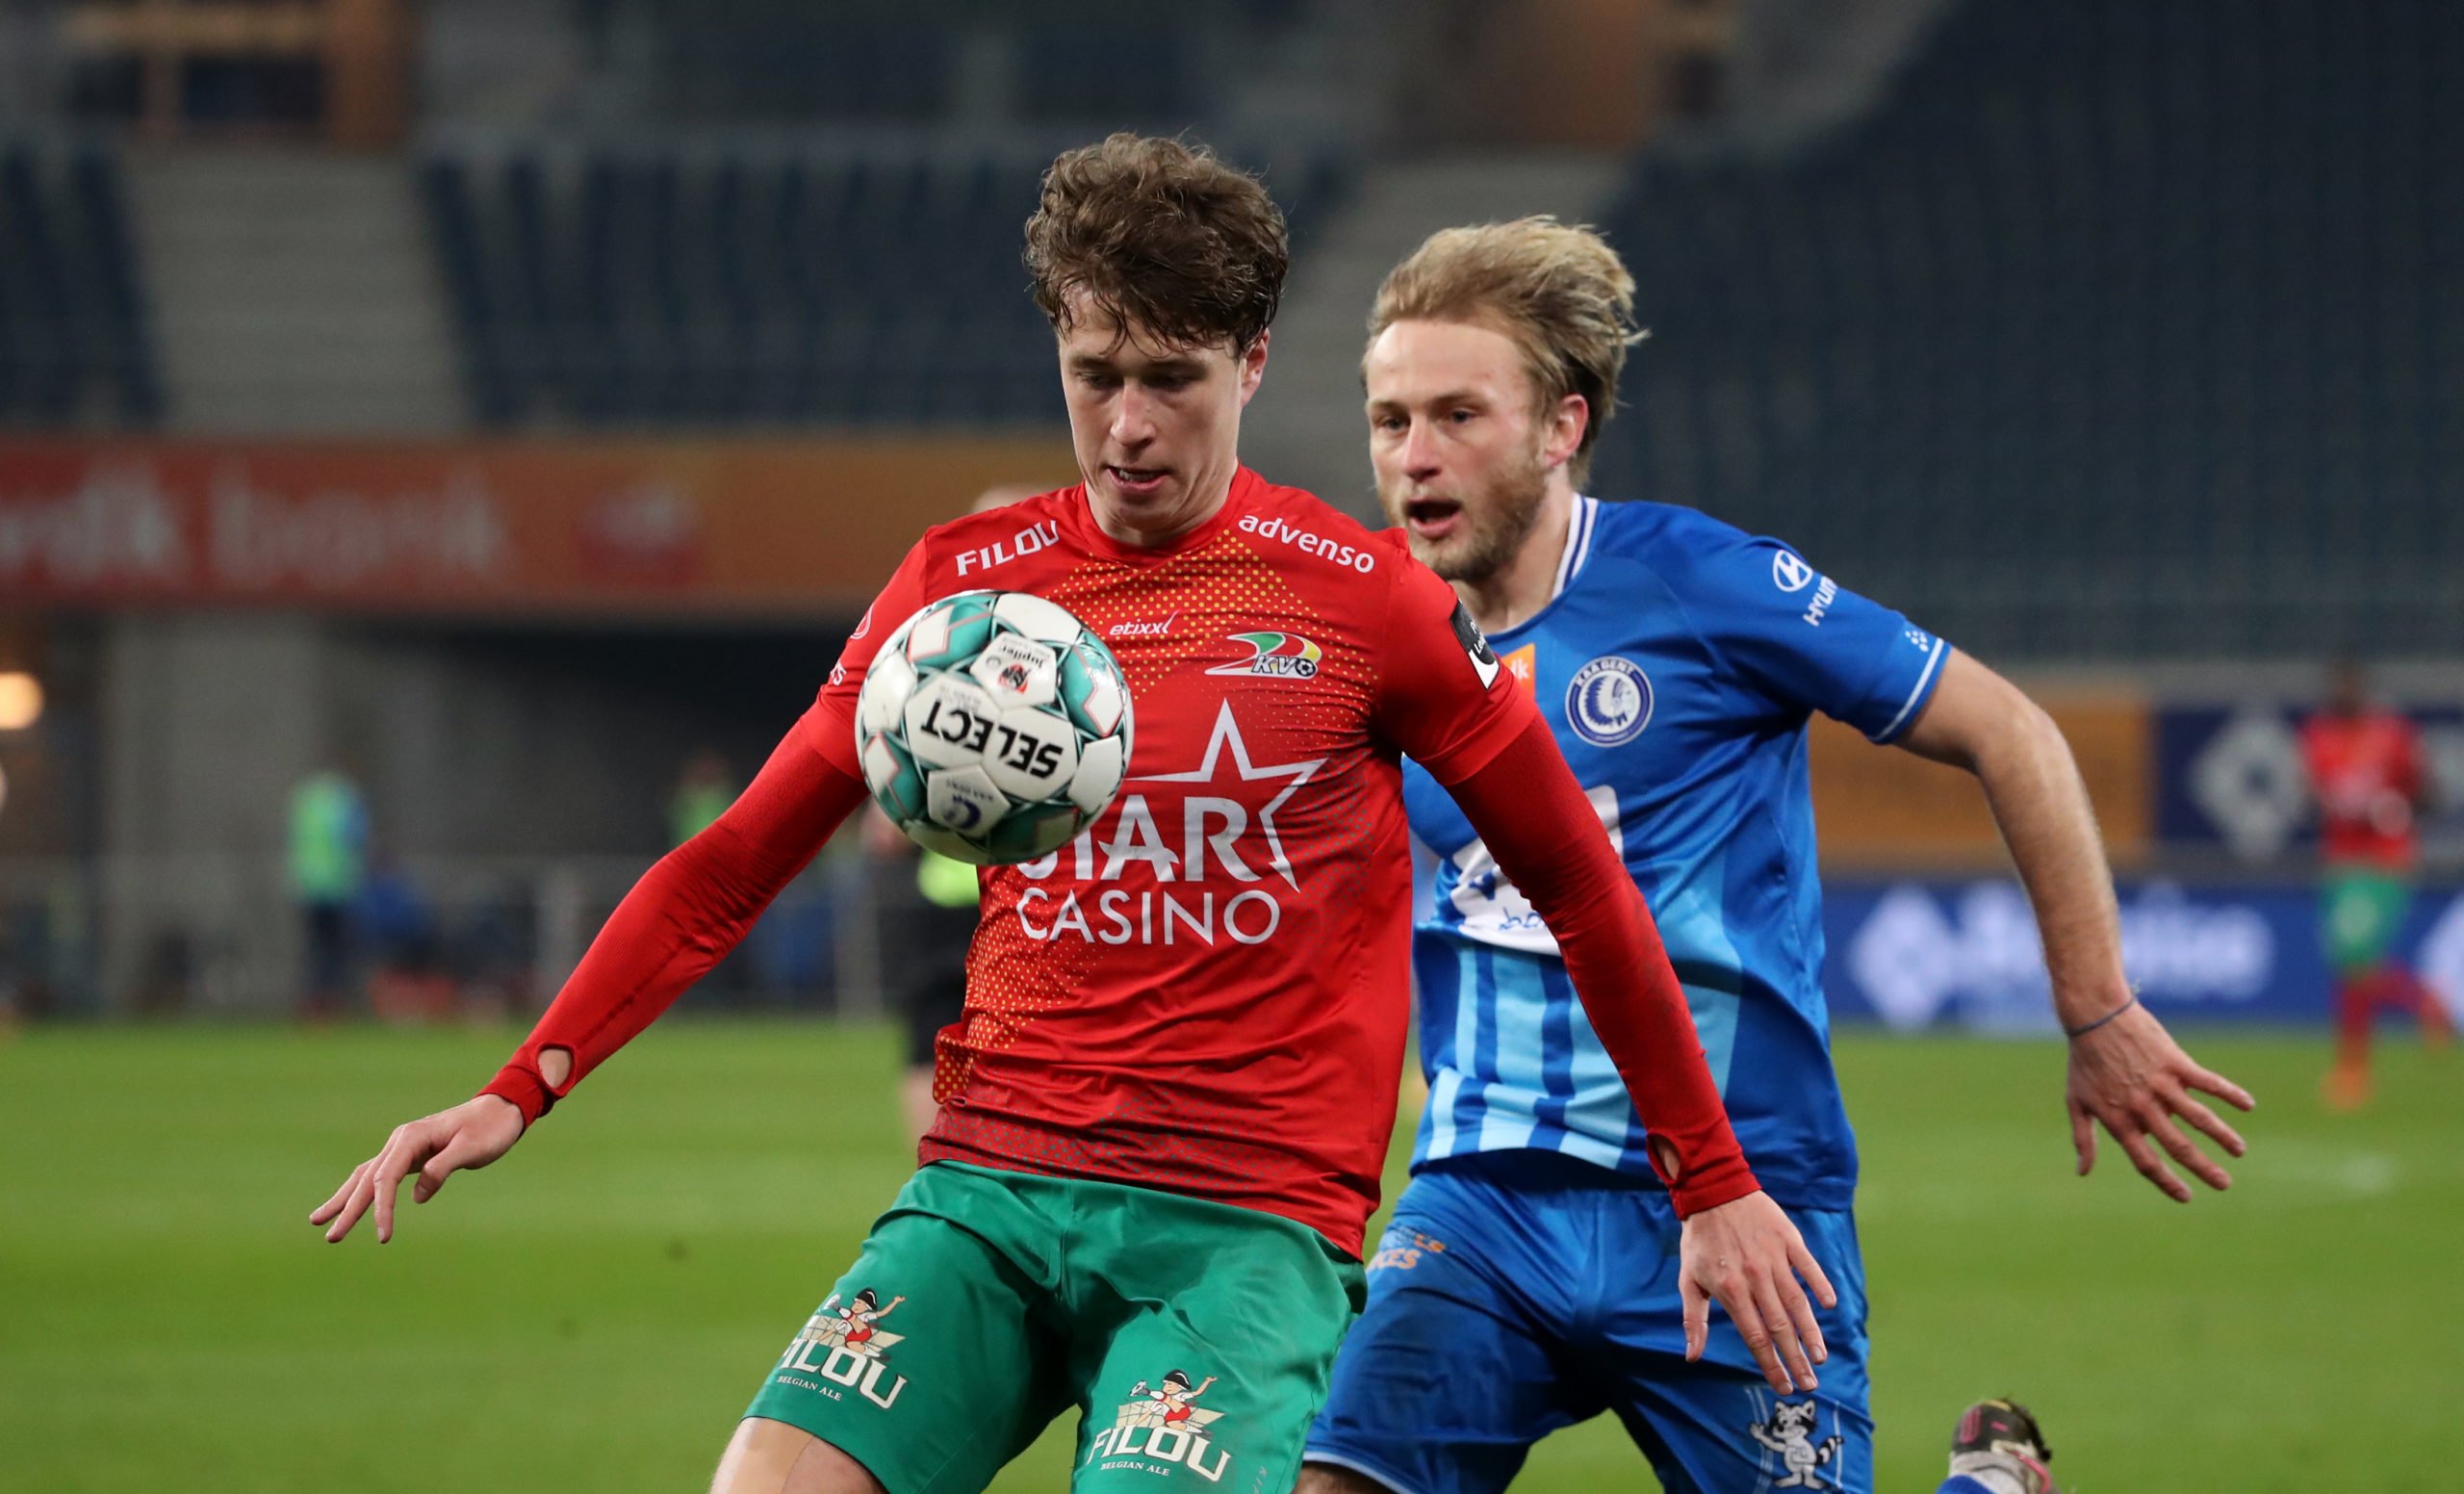 Celtic misfit Jack Hendry finds creative solution to avoid fines at KV Oostende